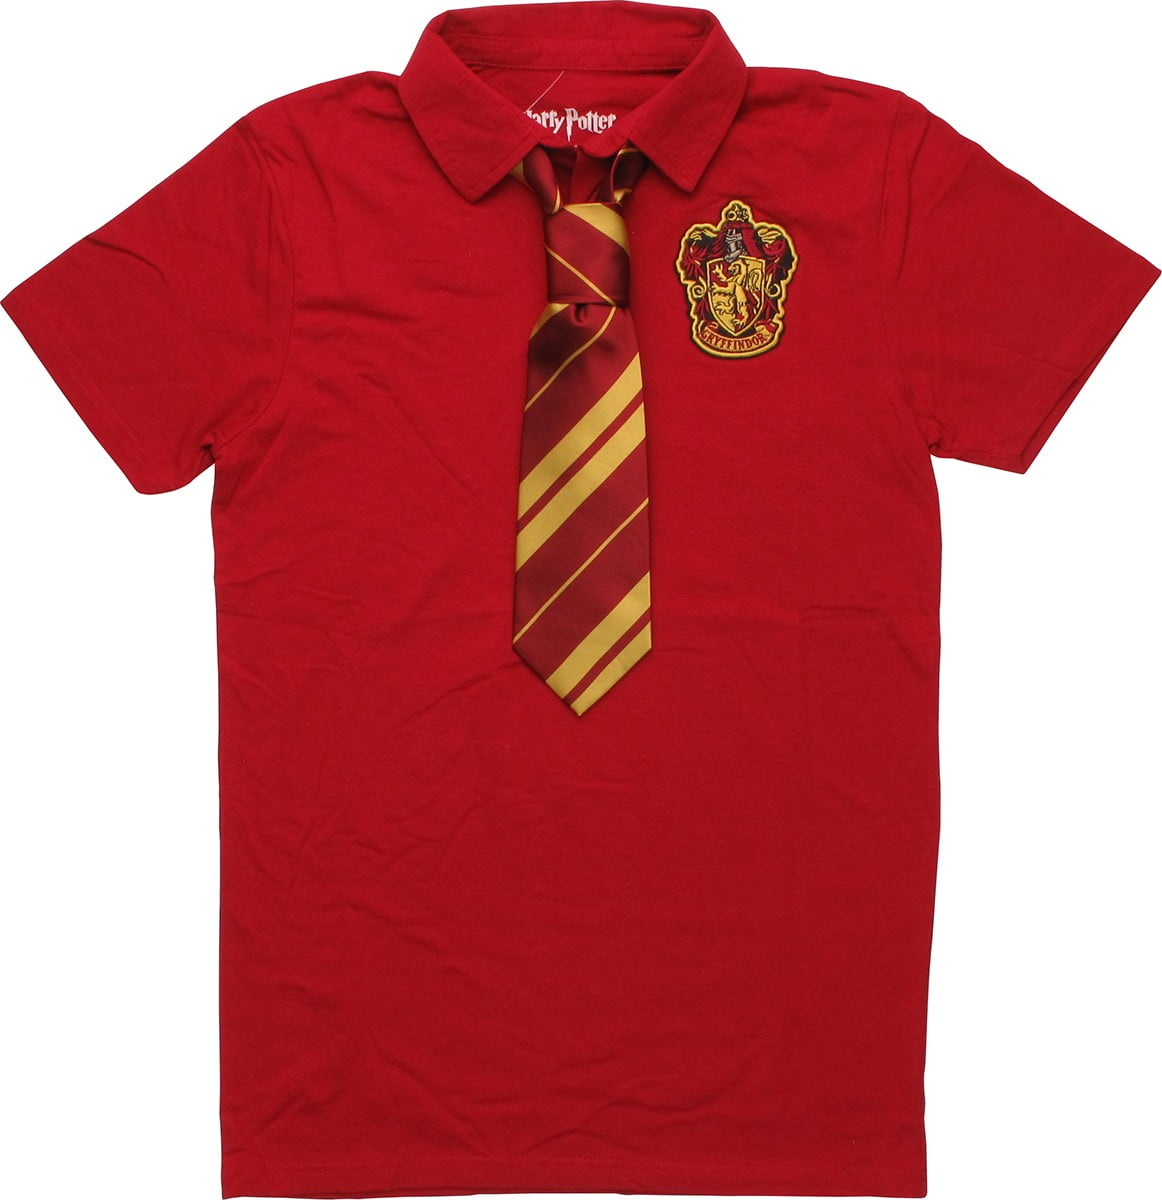 Harry Potter Gryffindor Mens Red Polo Shirt with Tie 